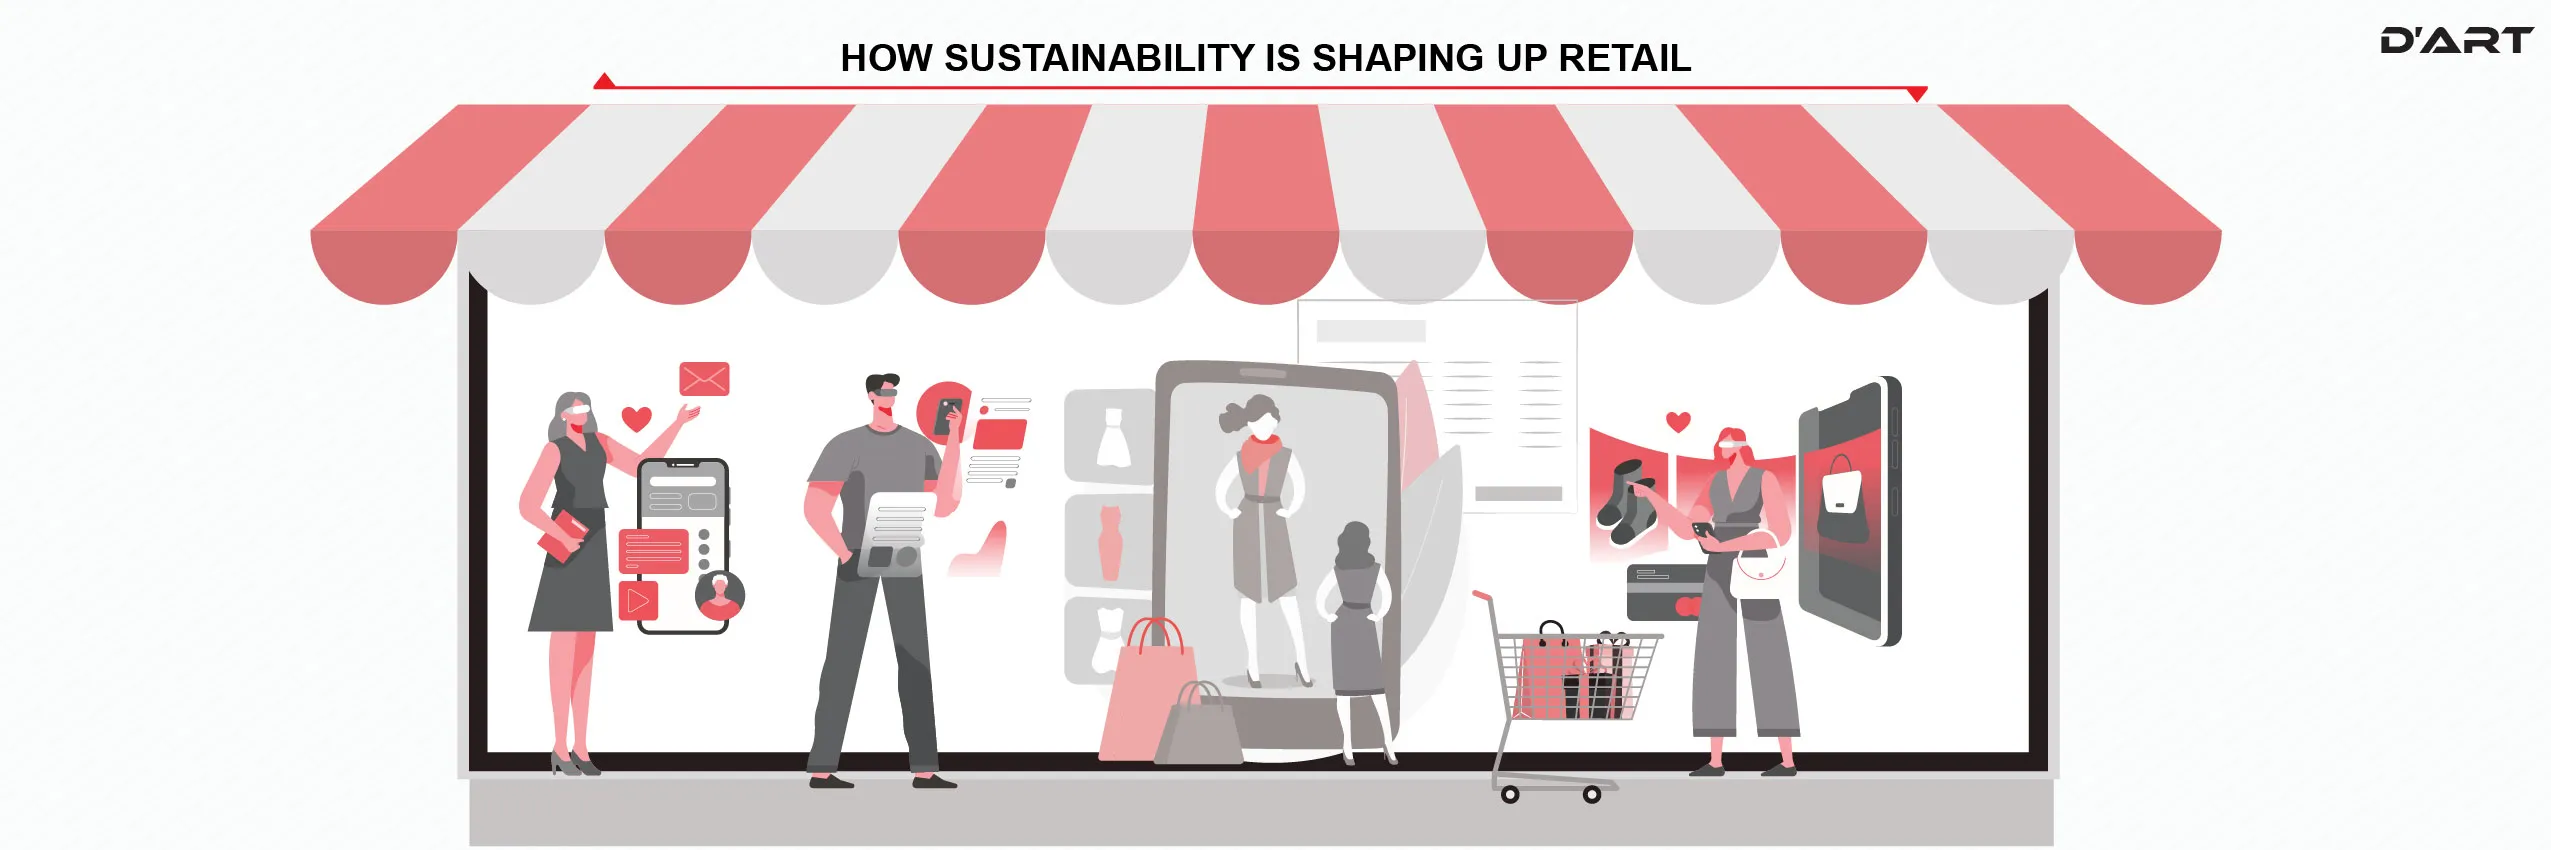 HOW SUSTAINABILITY IS SHAPING UP RETAIL 